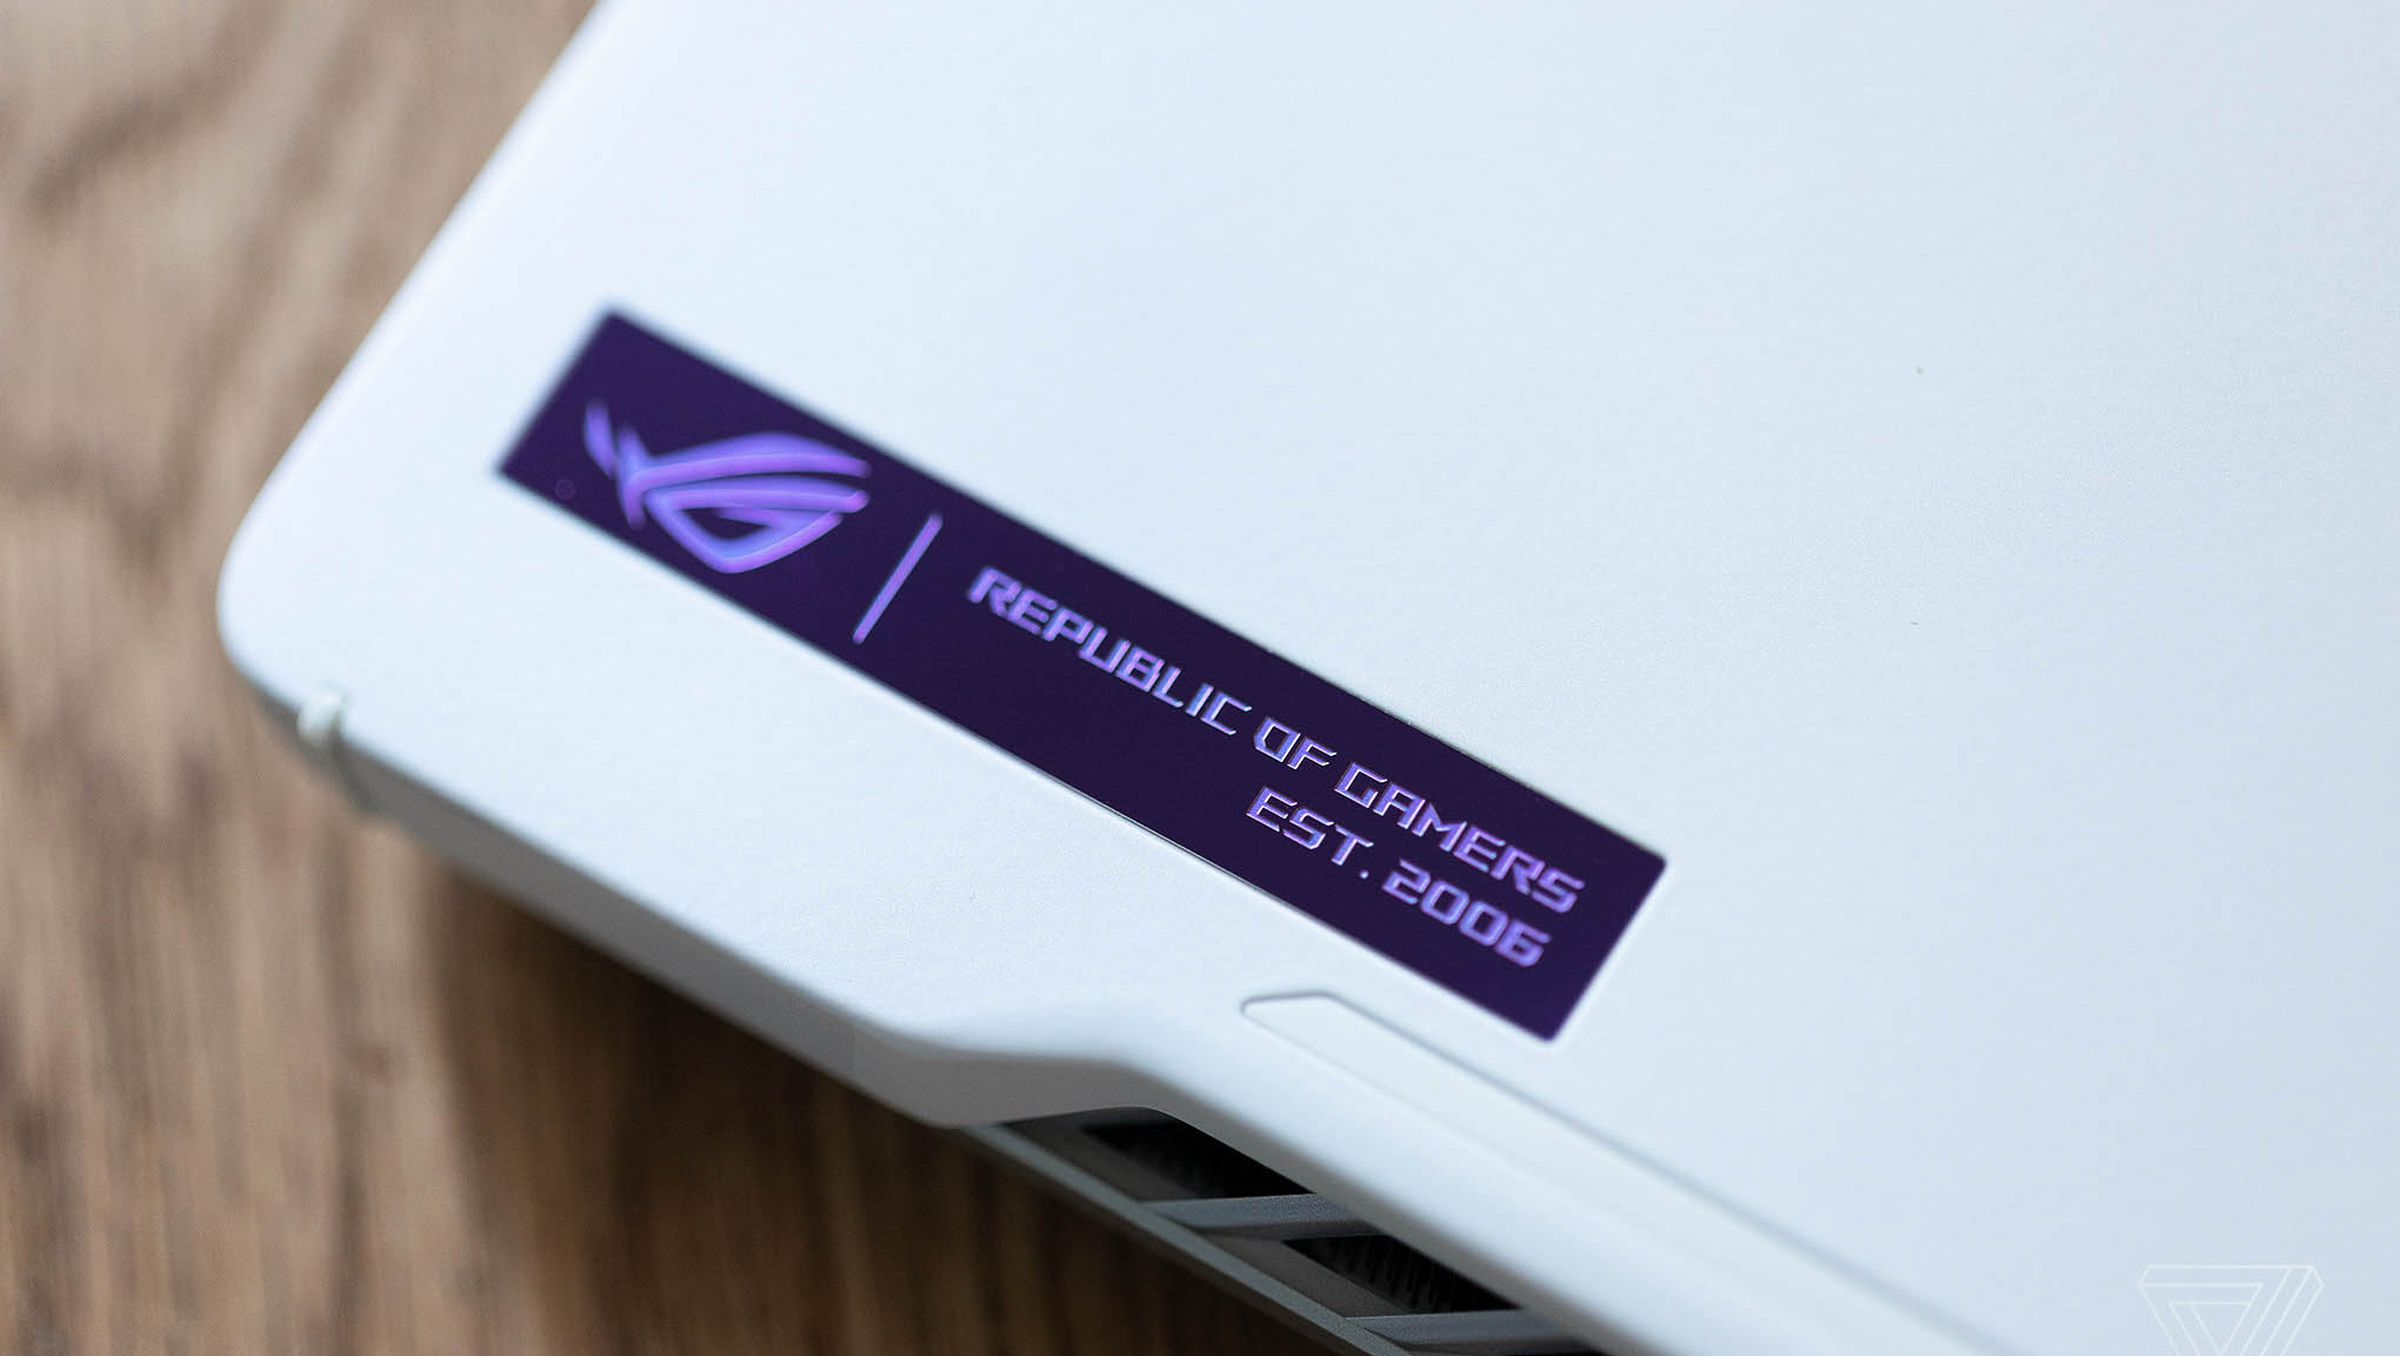 The Republic of Gamers nameplate on the lid of the Asus ROG Zephyrus G14.